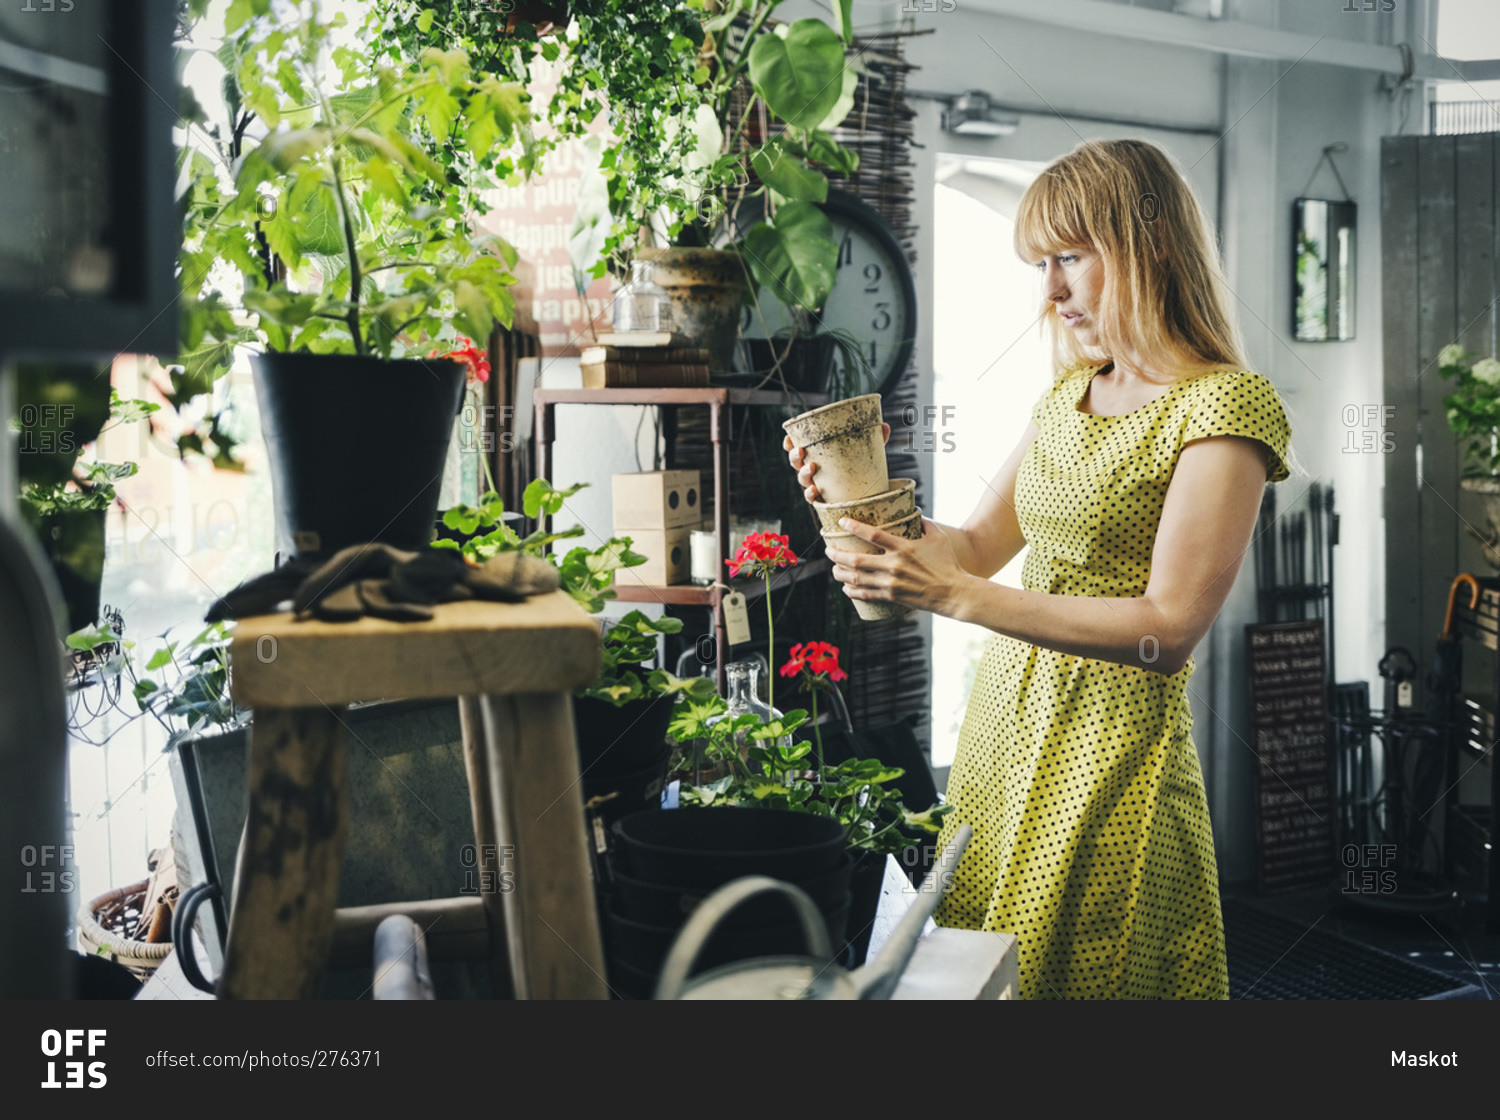 Mid adult woman holding pots in an interior design shop